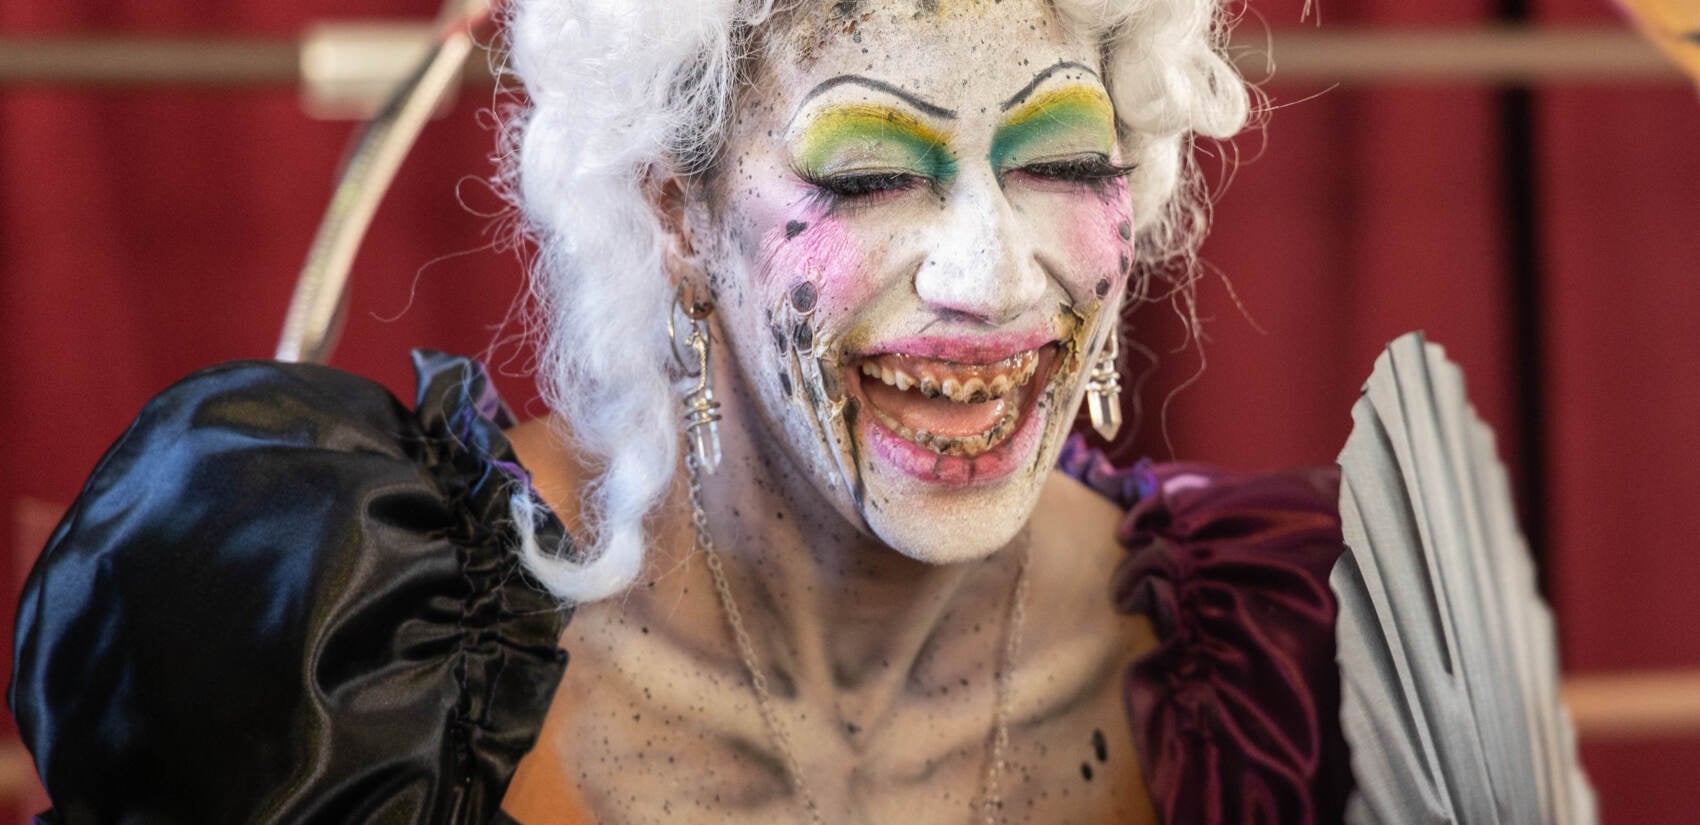 One of Eastern State Penitentiary’s 200 performers cackled for the cameras at the Halloween Nights Festival preview on Sept. 20, 2022. (Kimberly Paynter/WHYY)